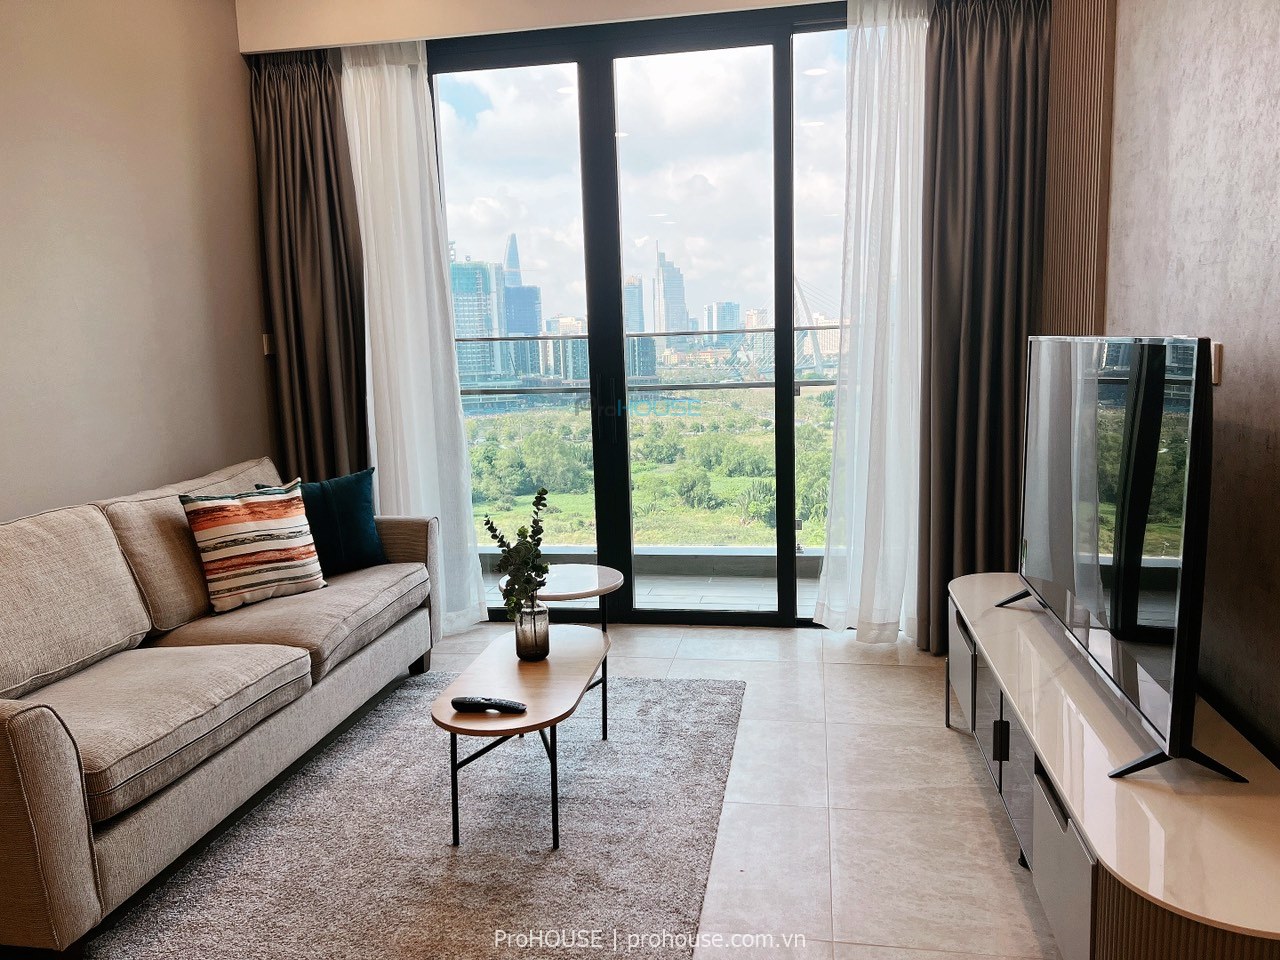 Low rental 1 bedroom apartment for rent in The River Thu Thiem